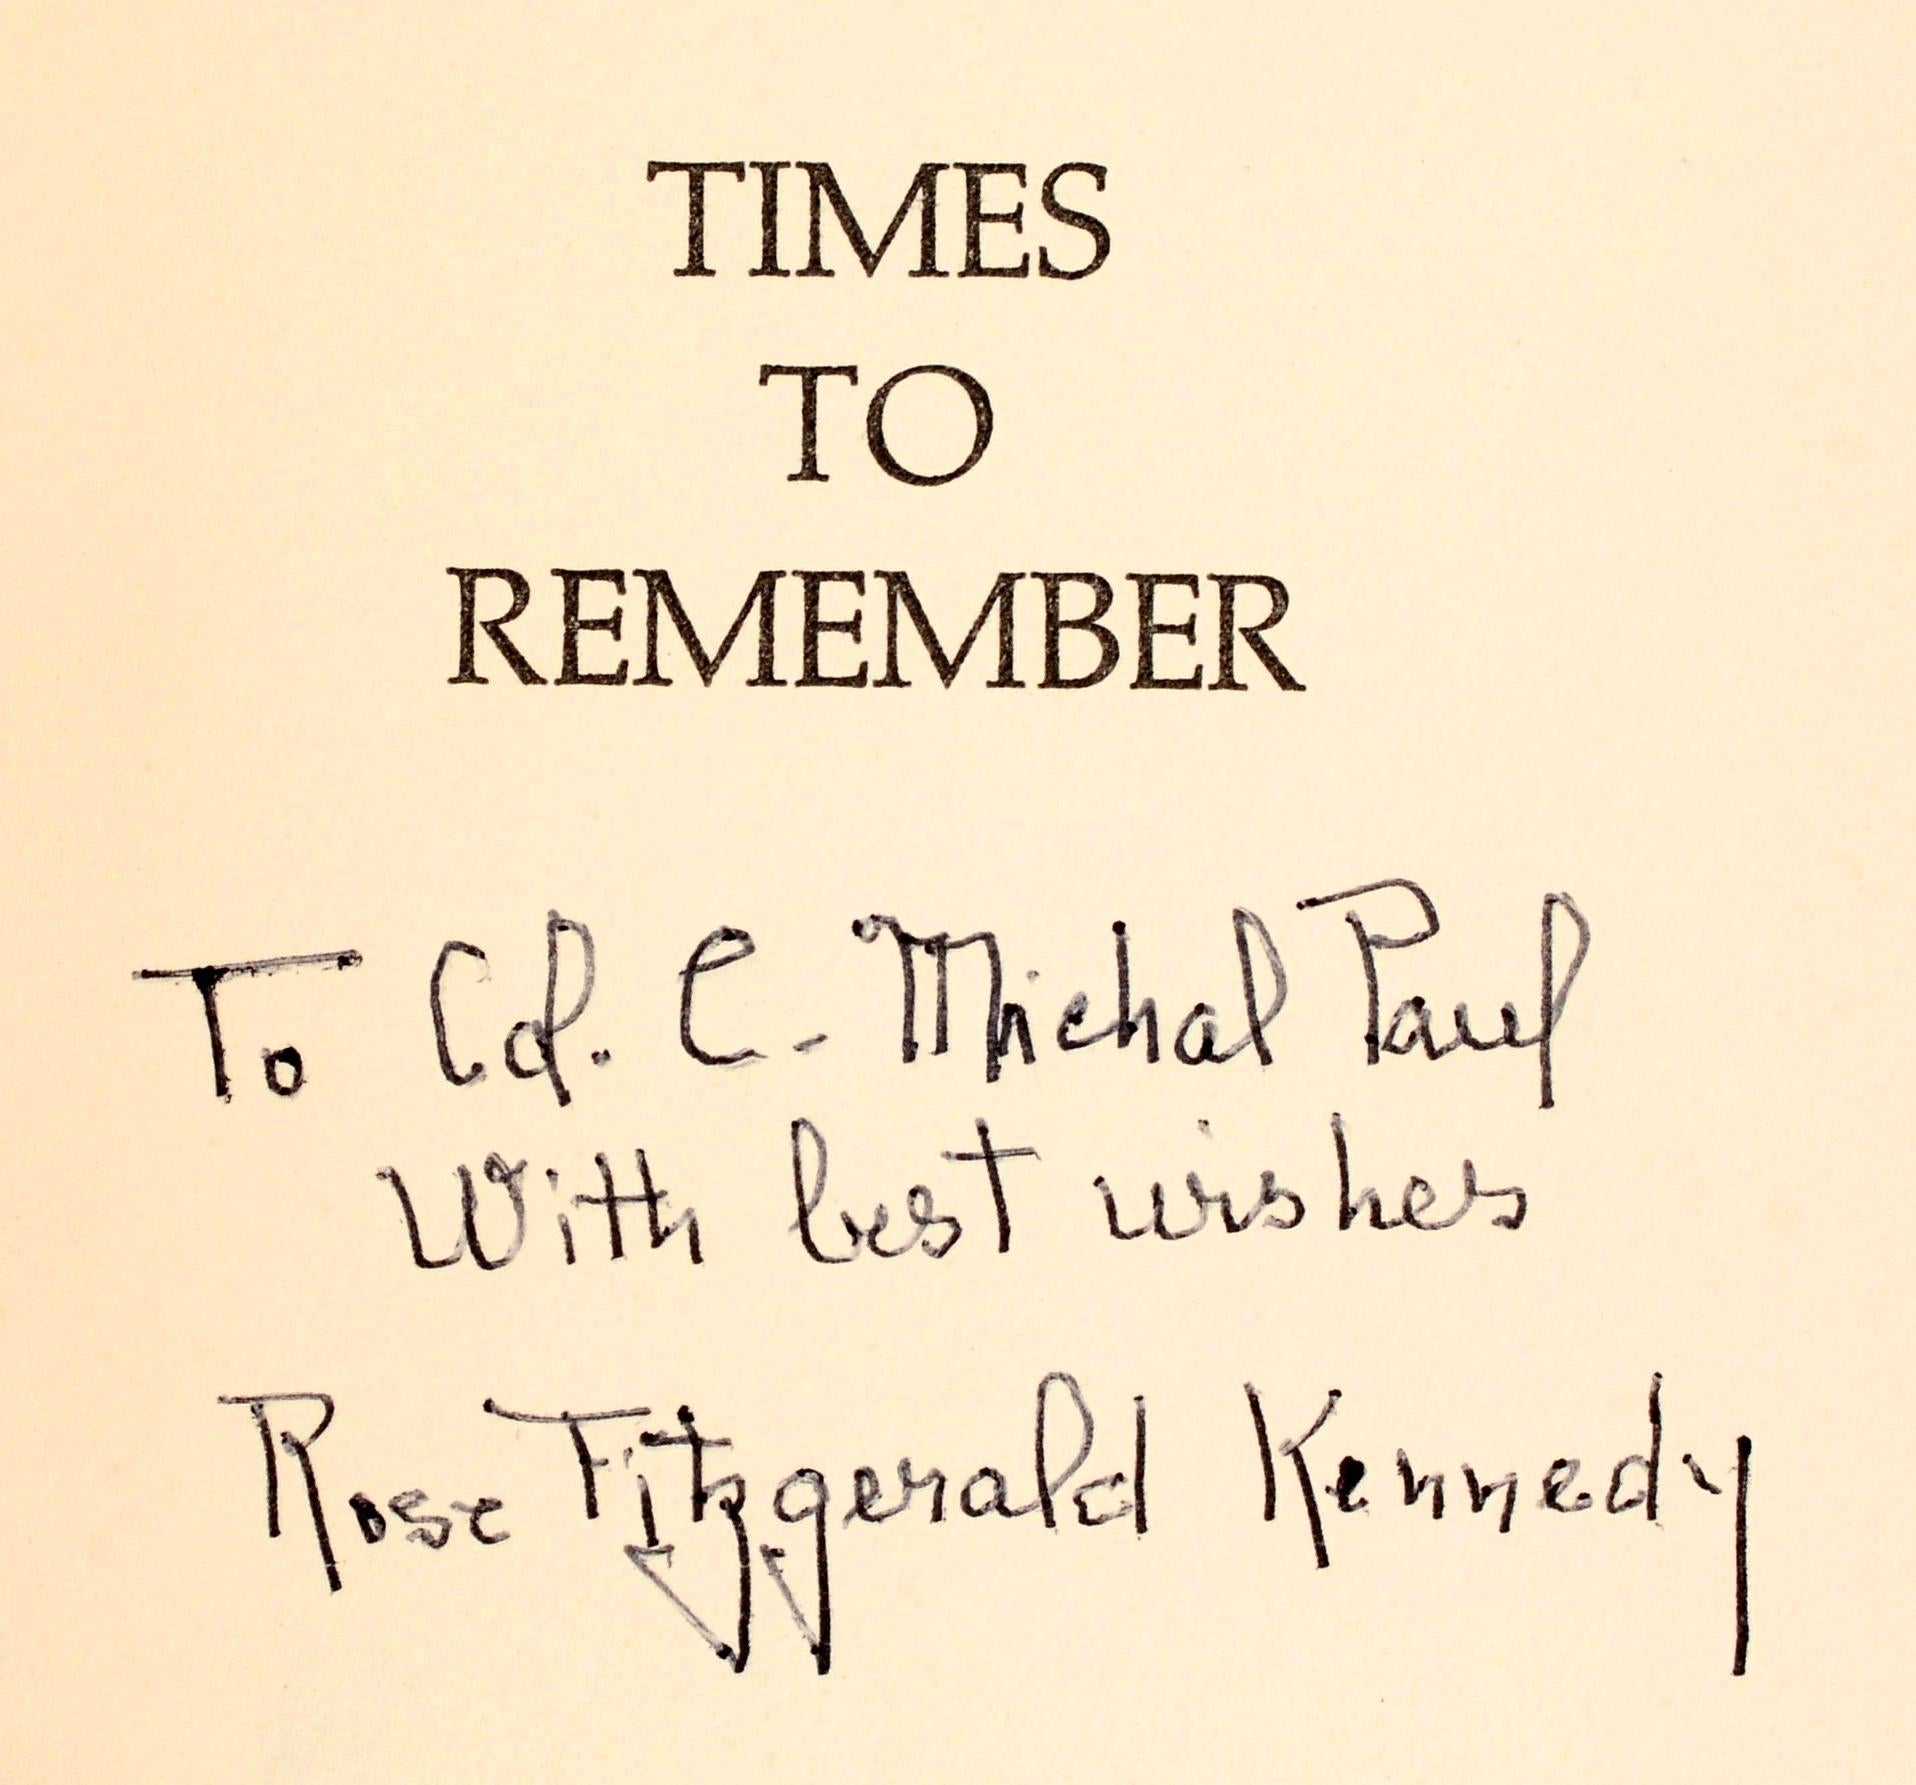 Times to Remember Written by and signed by Rose Fitzgerald Kennedy. First Ed hardcover with Brodart covered dust jacket. Signed by Mrs. Rose Kennedy on front end paper with the following inscription: “To Col. Michael Paul With Best Wishes, Rose